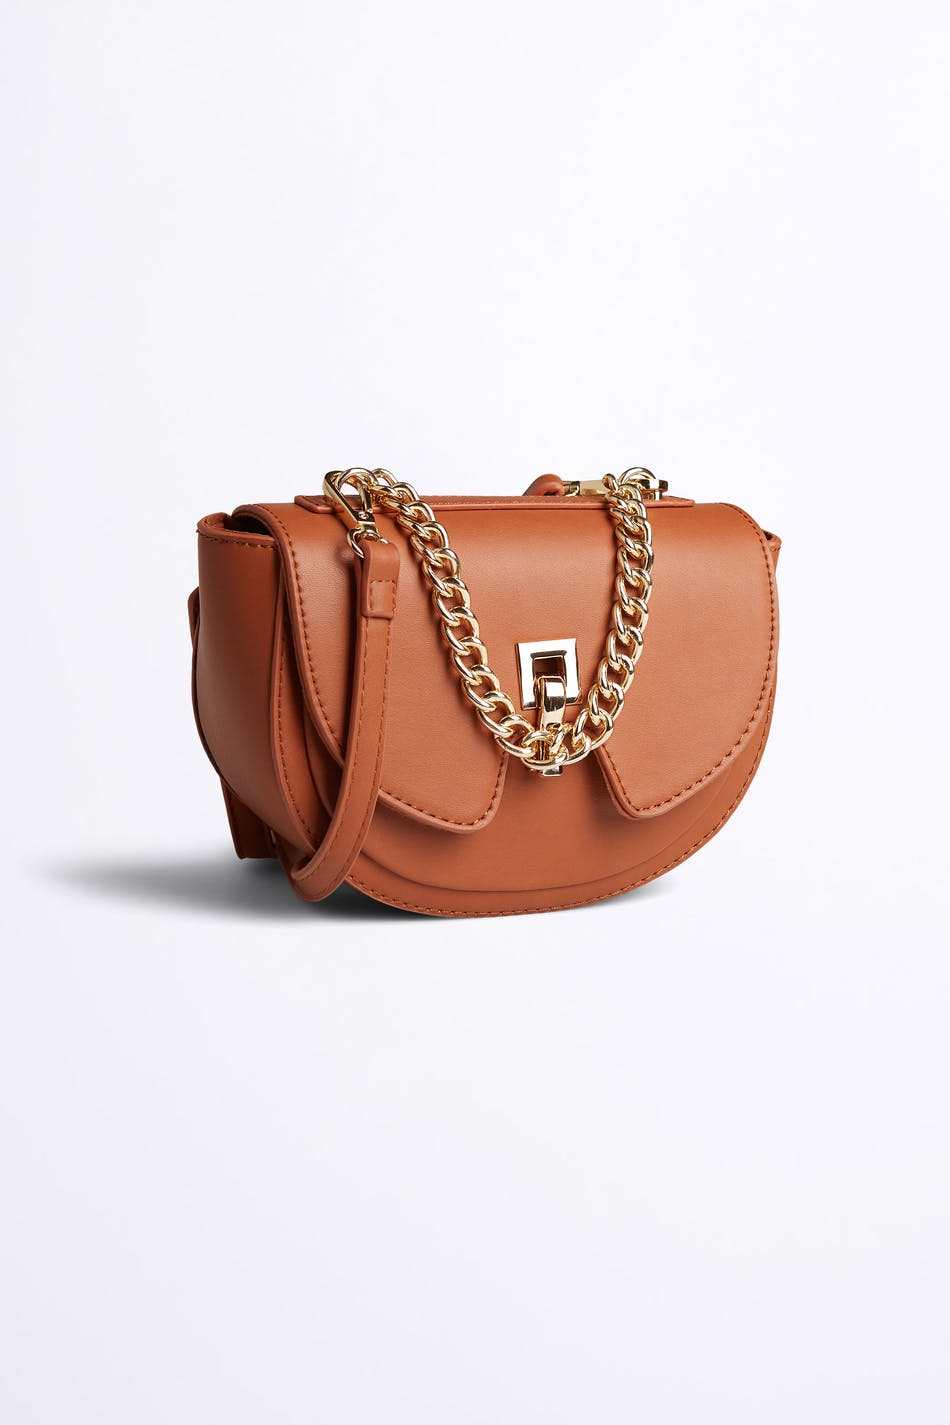 Anabelle bag